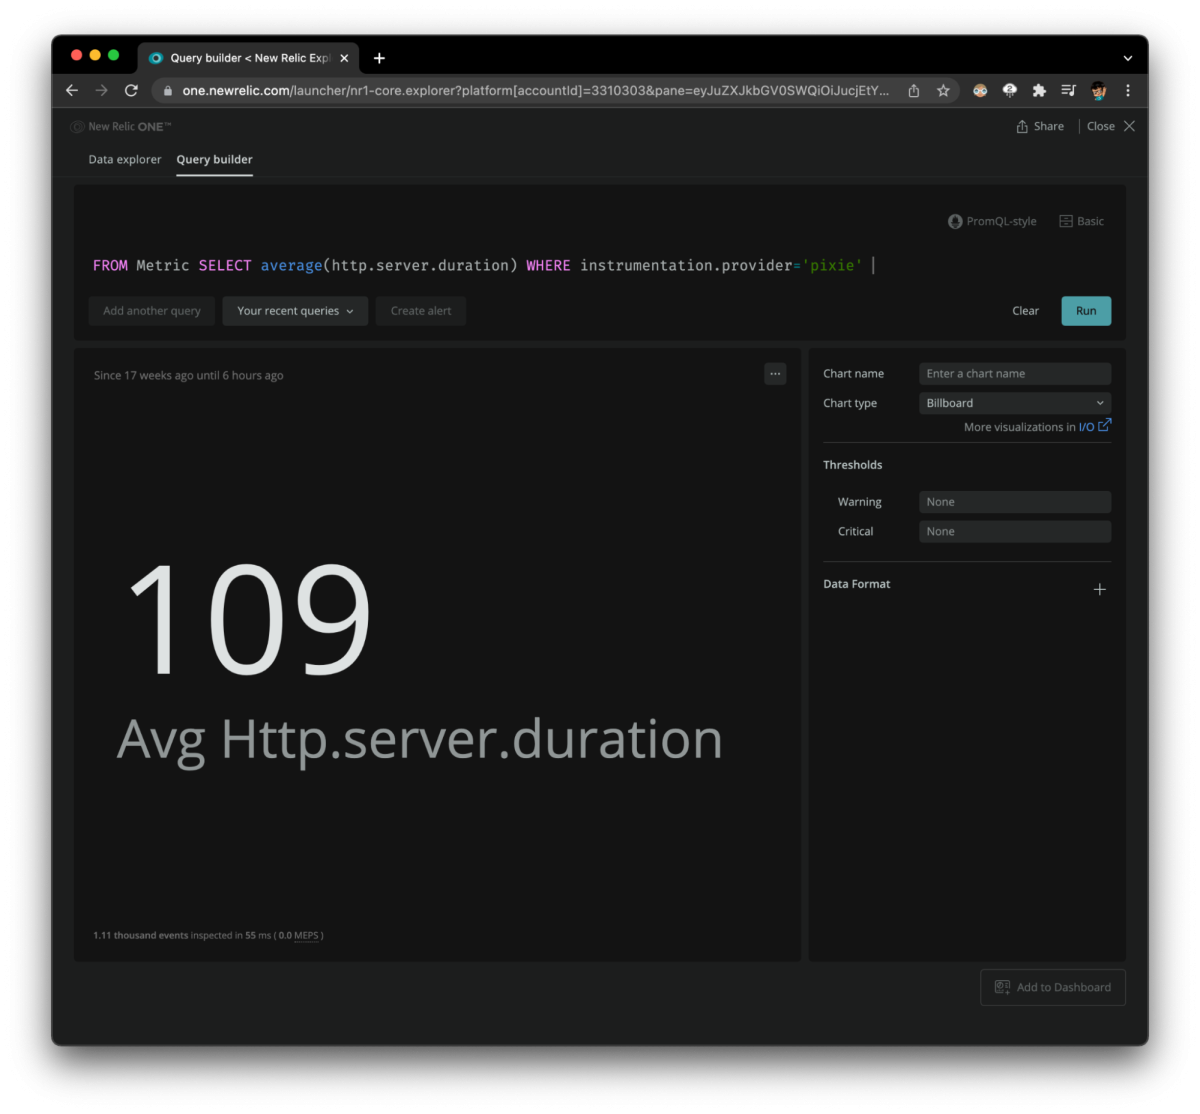 New Relic One dashboard shows the average HTTP server duration